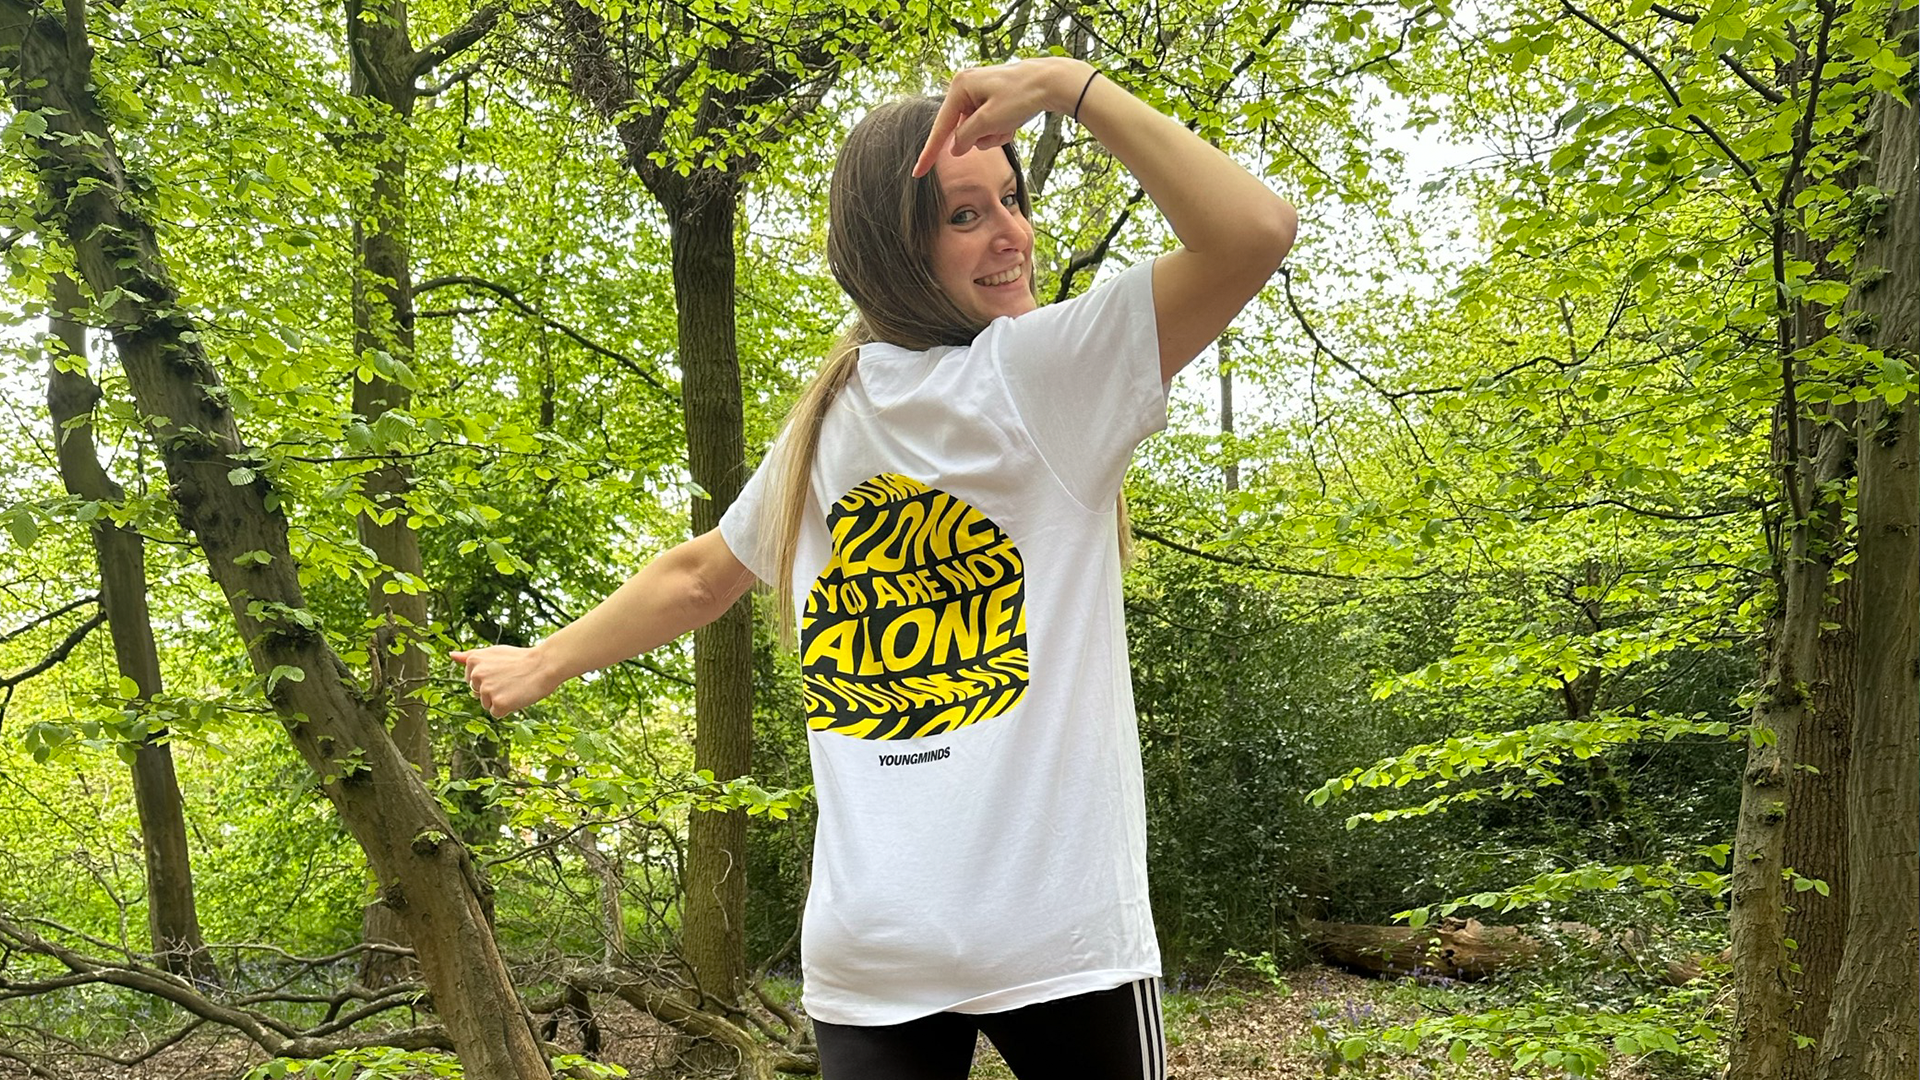 A girl wearing a YoungMinds tshirt is standing in the woods. She has her back to the camera but has turned her head around and is smiling. She is pointing at the YoungMinds t-shirt logo on the back of her tshirt.